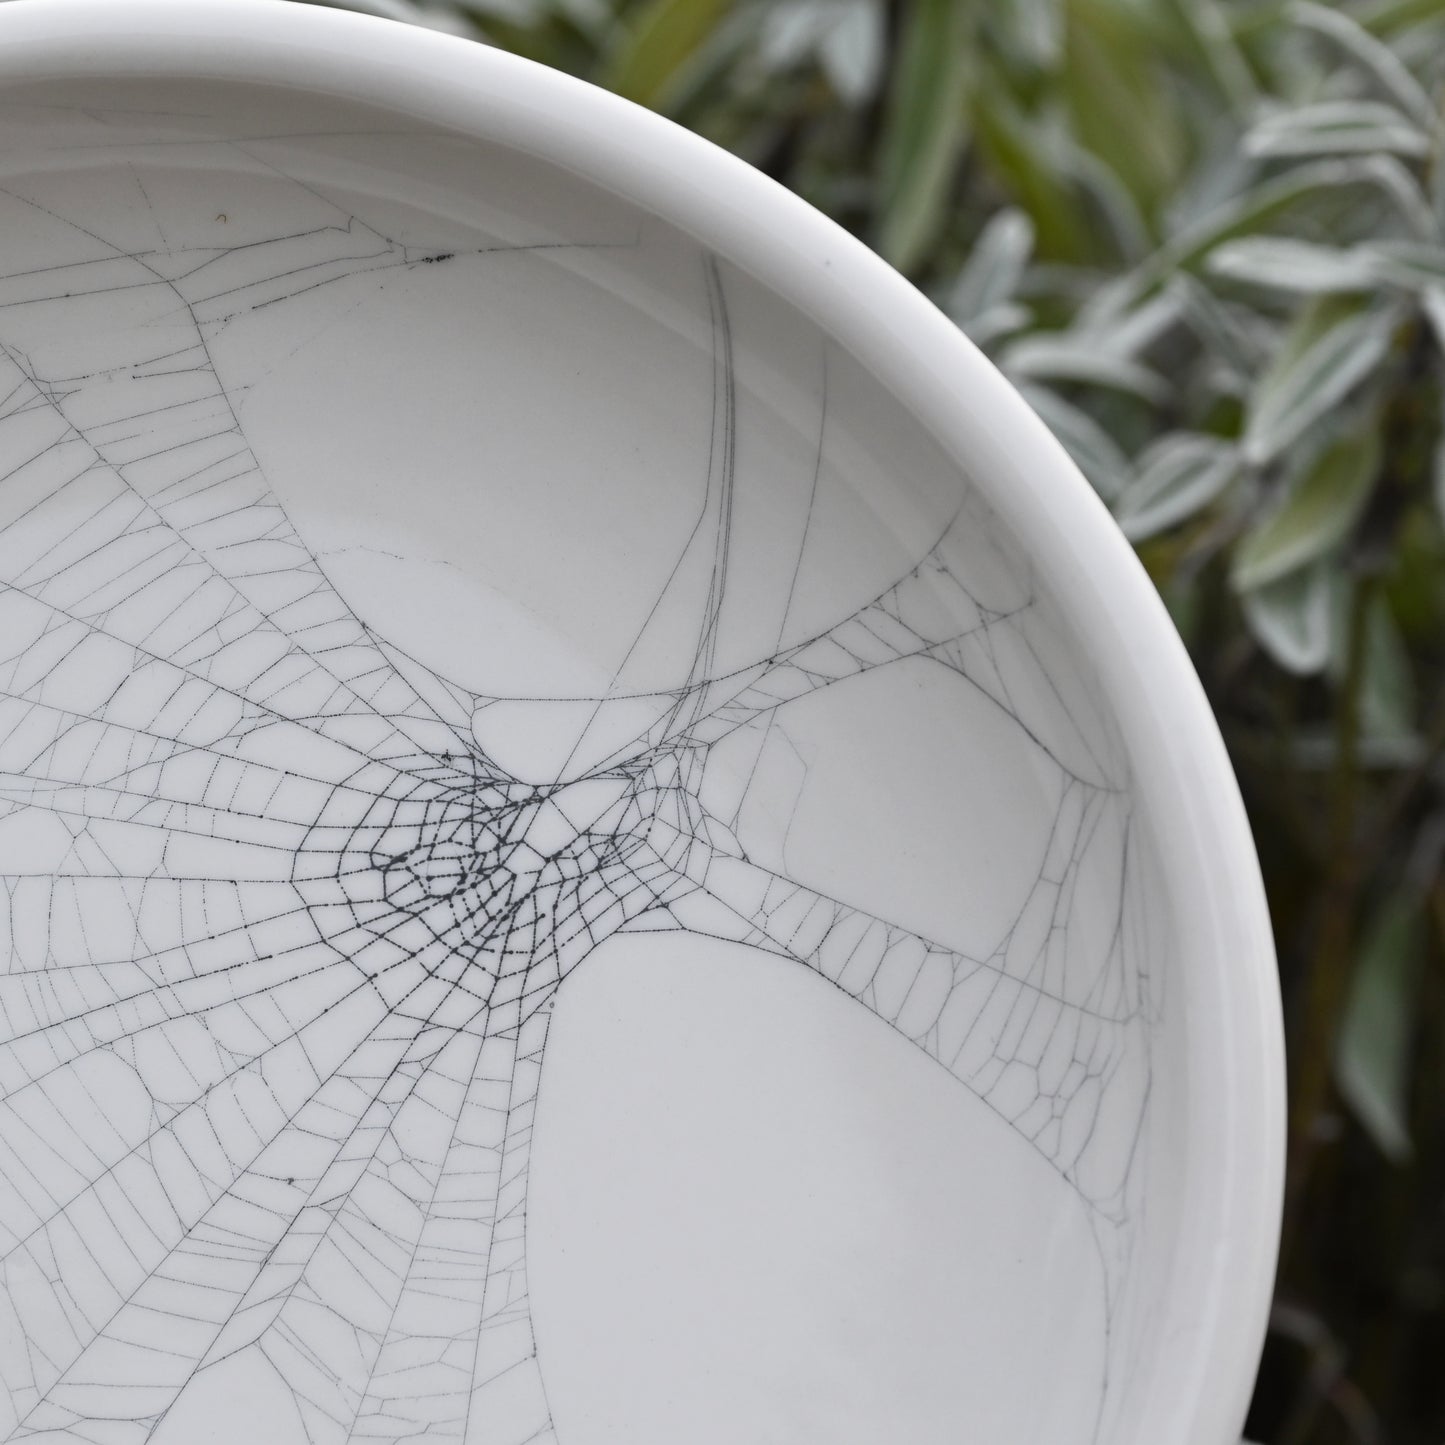 Web on Clay (267), Collected October 28, 2022